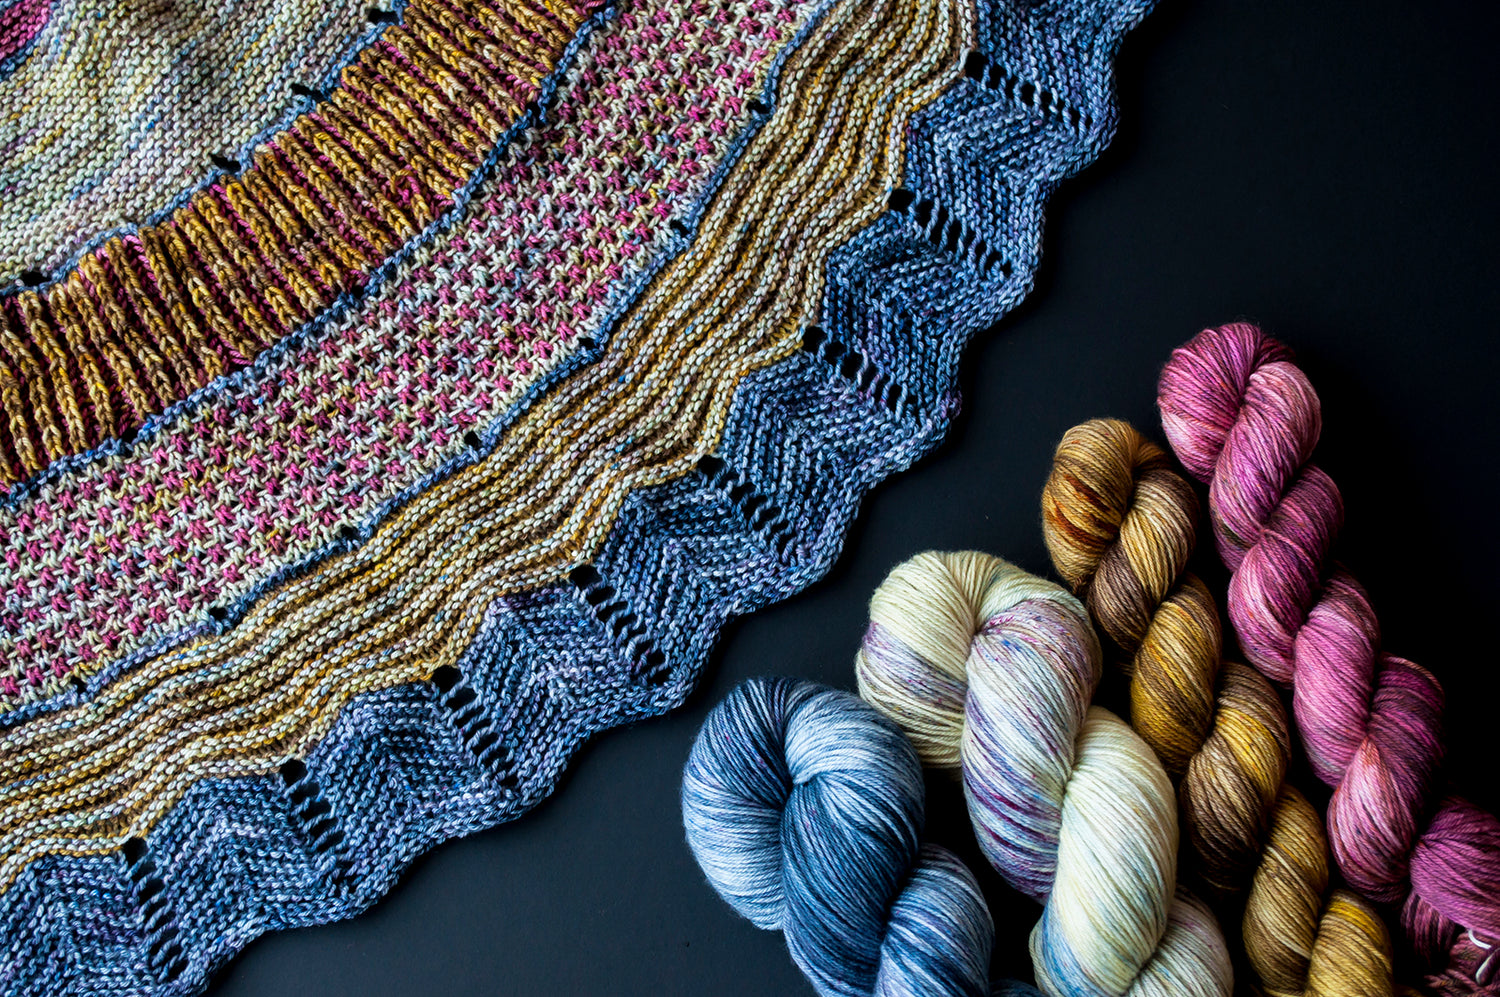 Exploration Station Shawl Kits and Top Draw Sock - Friday 22nd March